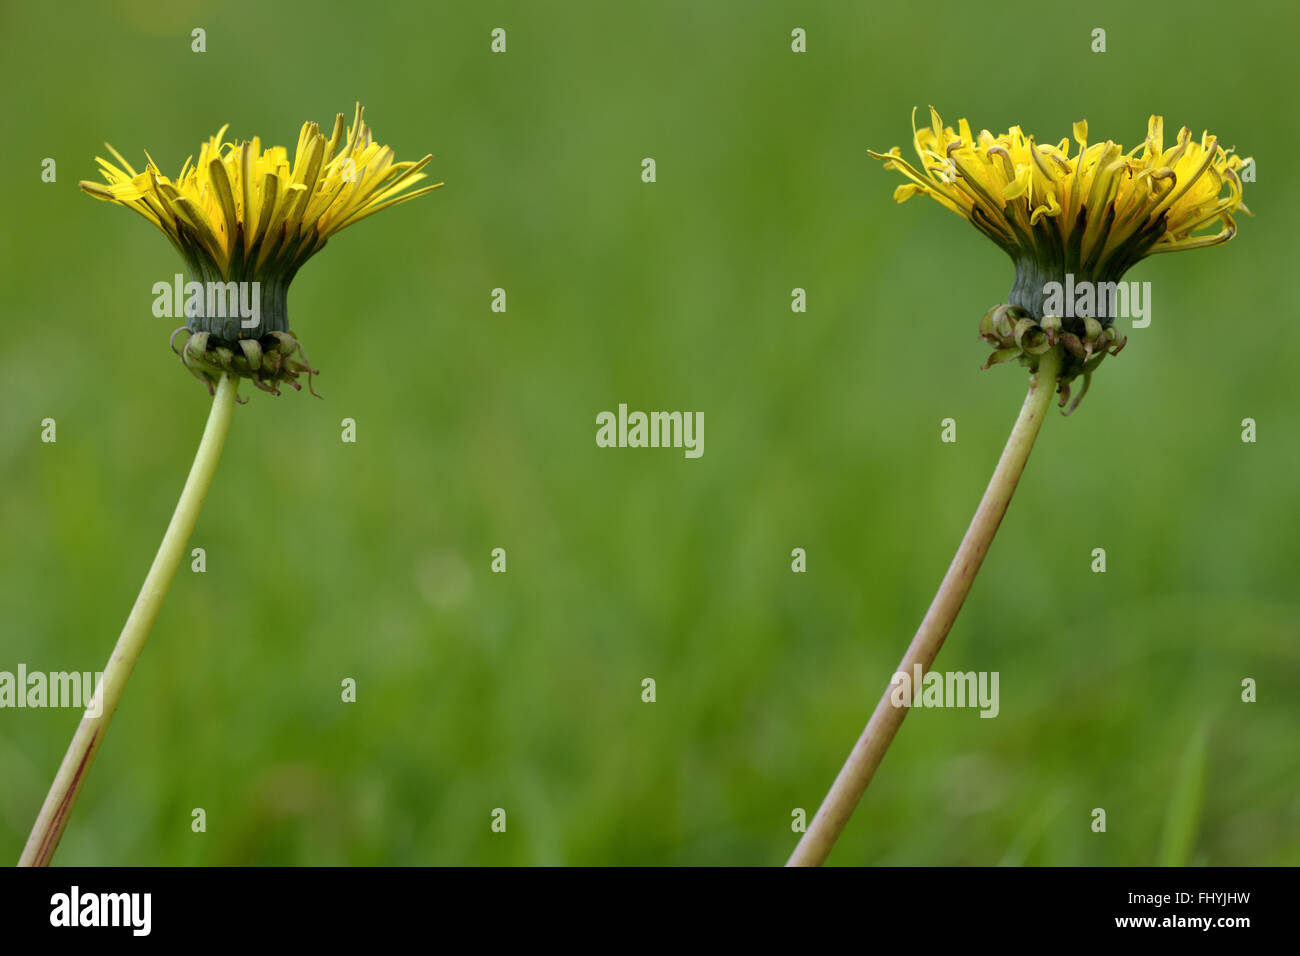 Dandelion (Taraxacum offinale). Yellow flowers in the daisy family (Asteraceae) Stock Photo